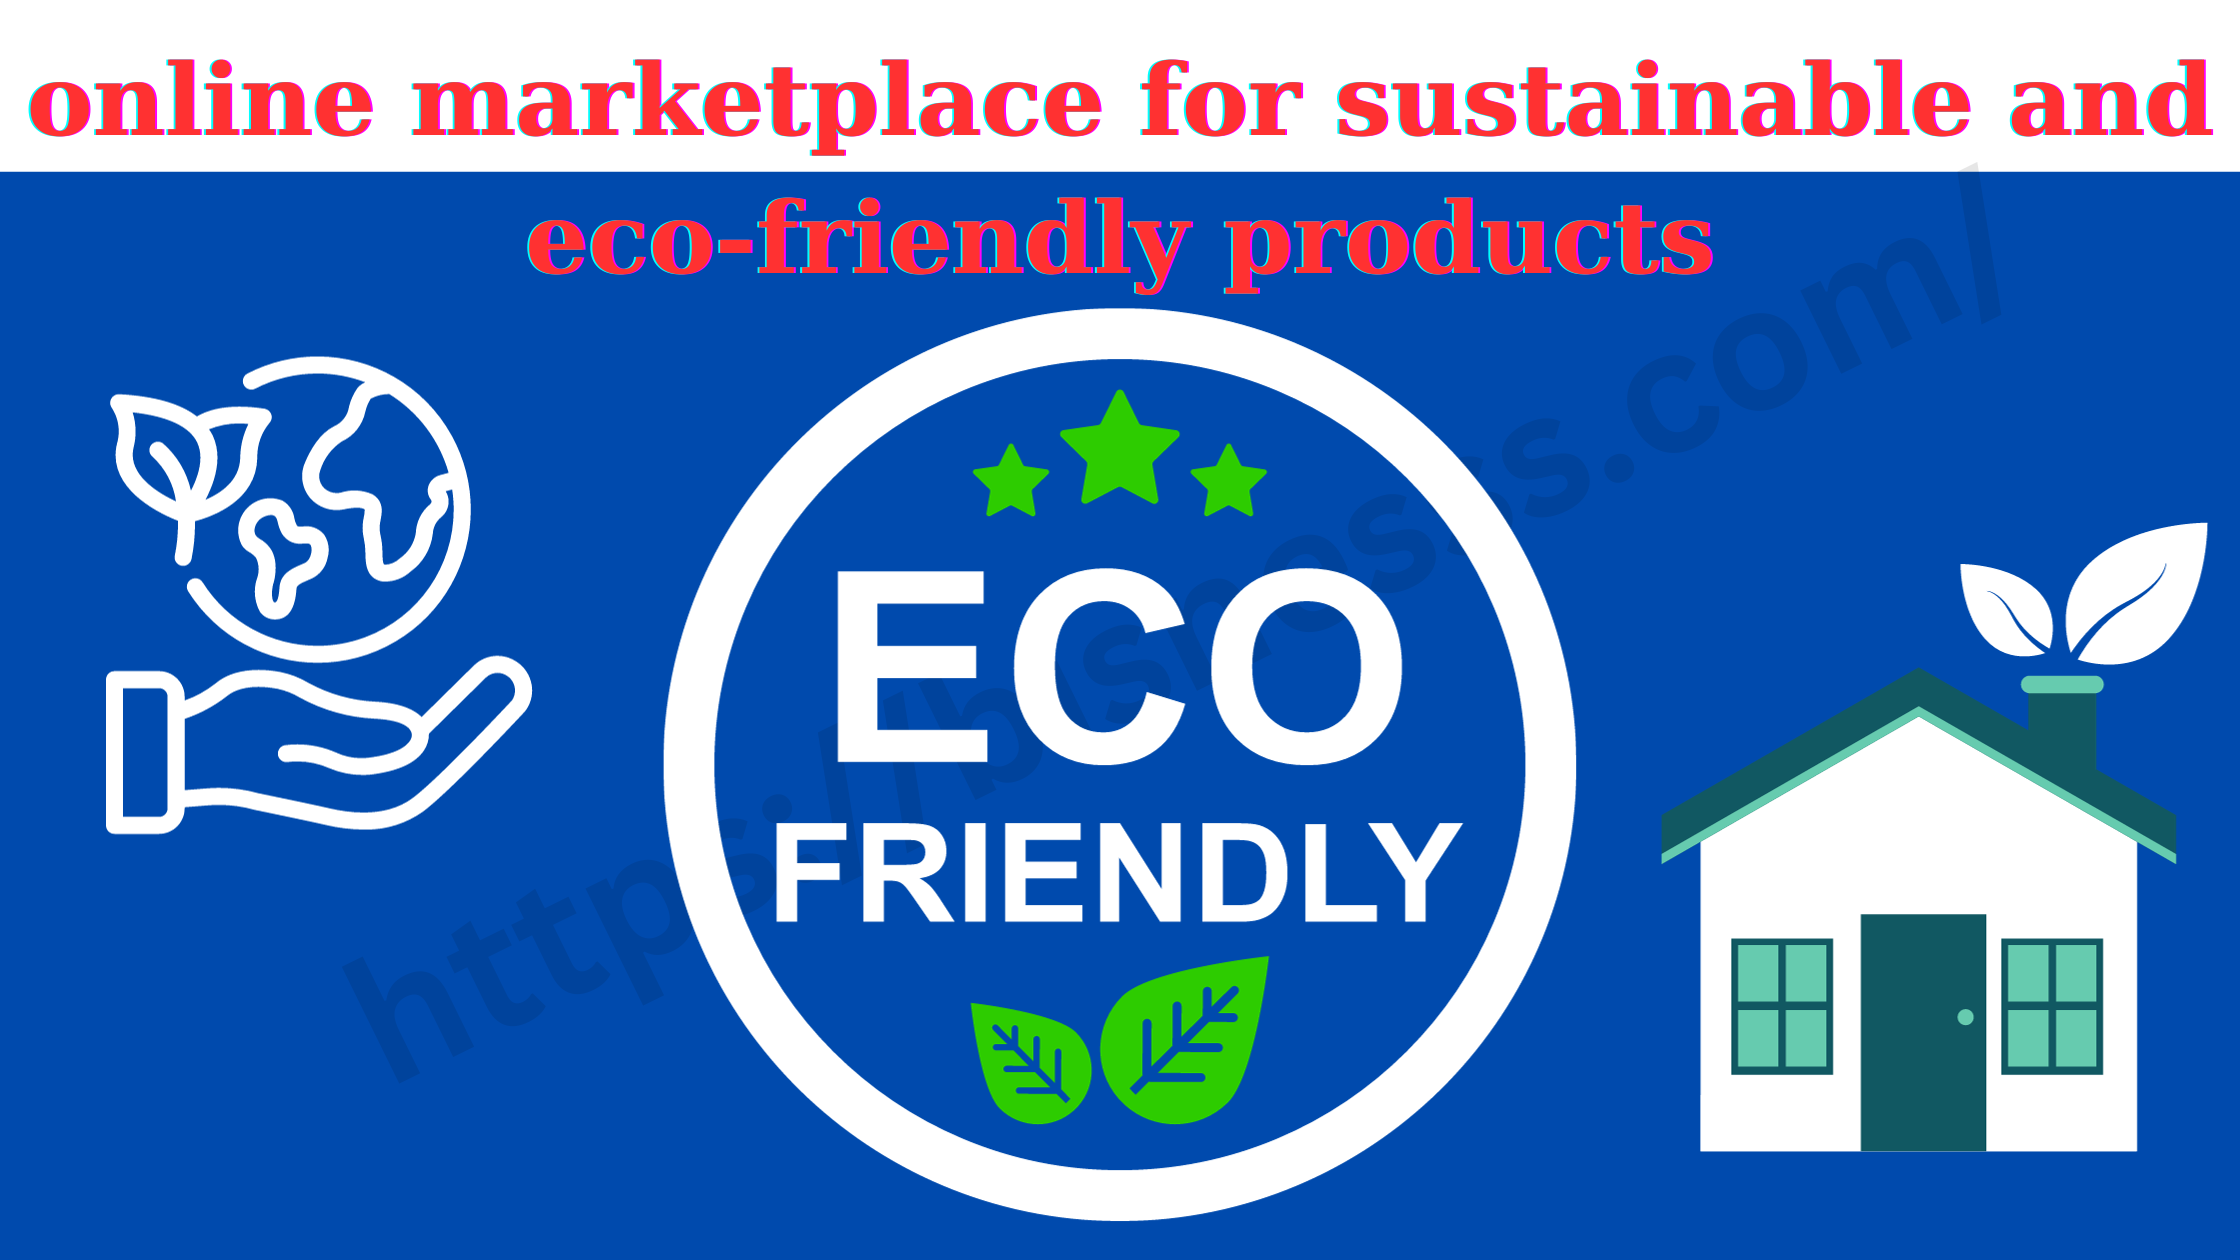 online marketplace for sustainable and eco-friendly products